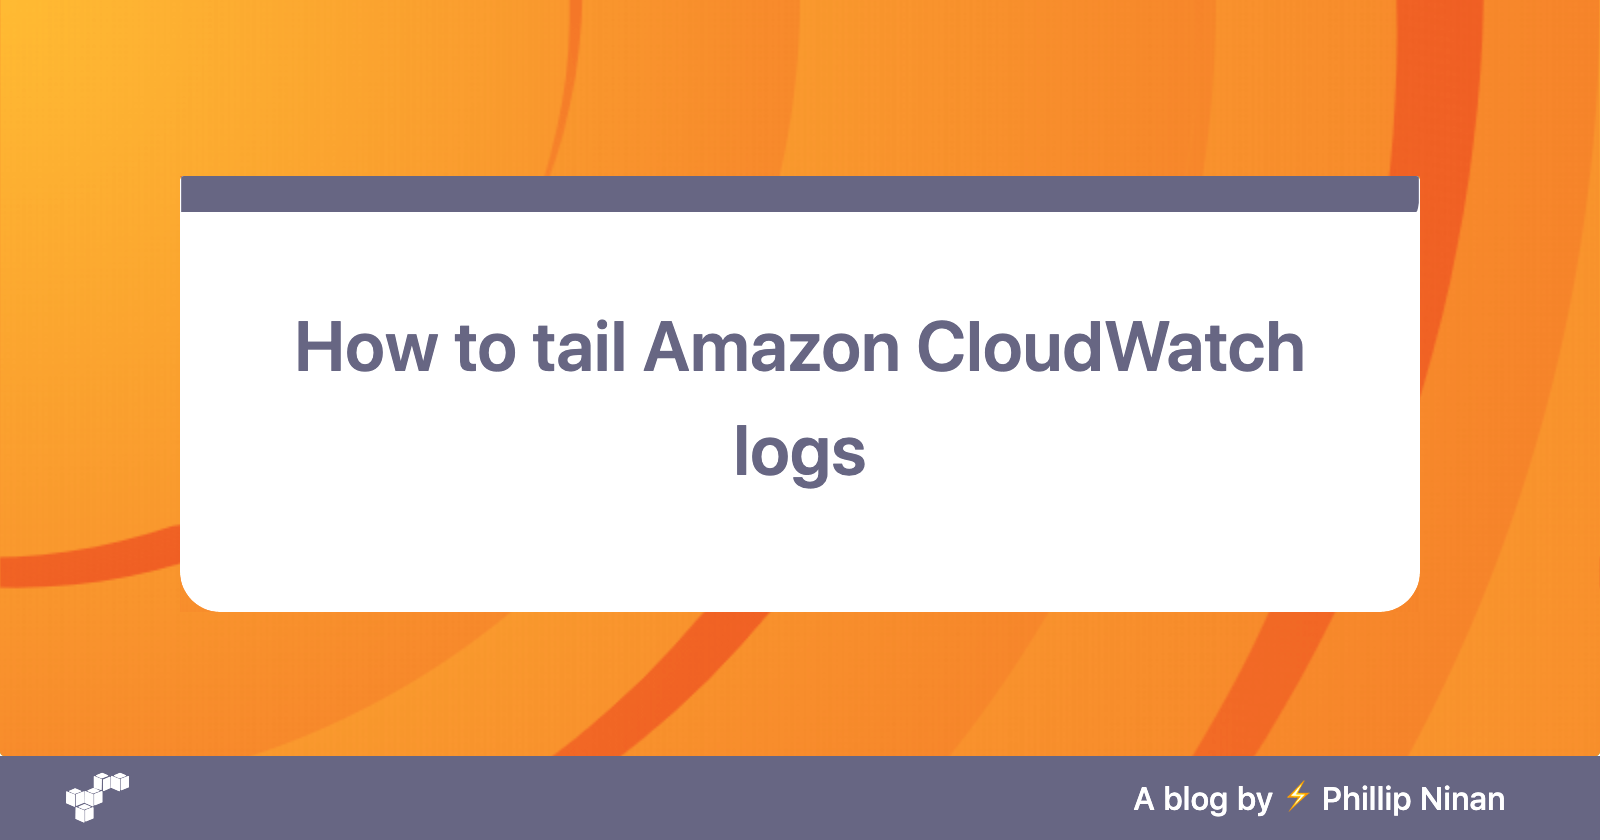 How to Tail Amazon CloudWatch Logs from Your Terminal